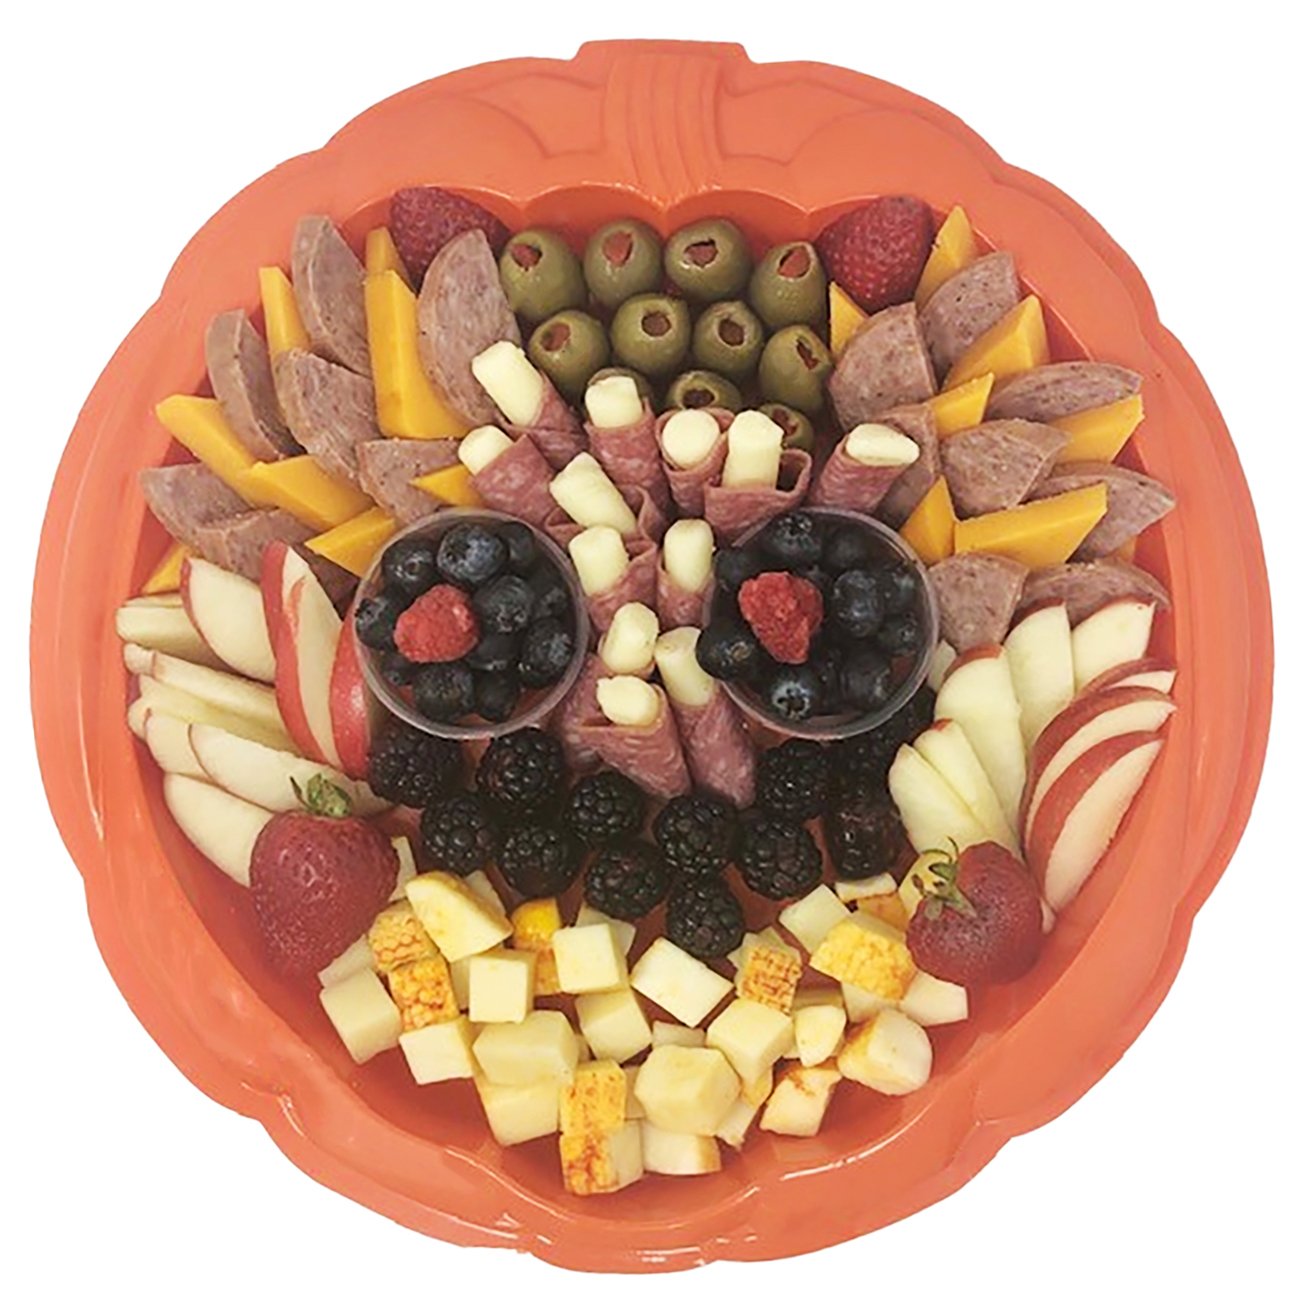 H-E-B Deli Ghoulish Pumpkin Cheese Board - Shop Standard Party Trays at ...